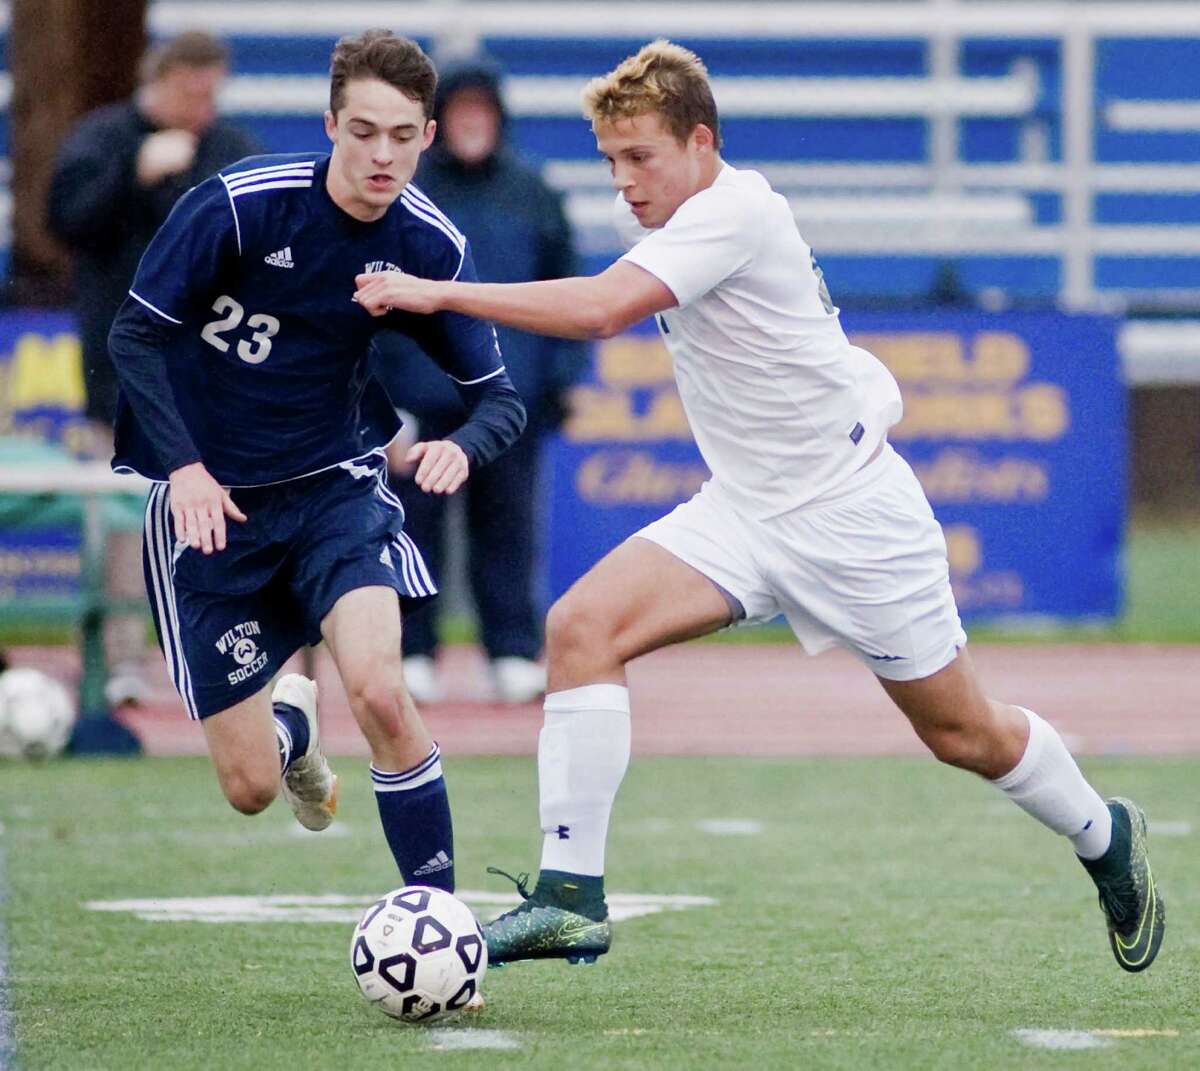 Wilton High School's Daniel Jensen tries to get the ball before New Milford High School's Dimitri Lambropoulos gets away in the Class LL game at Brookfield High School. Thursday, Nov. 12, 2015